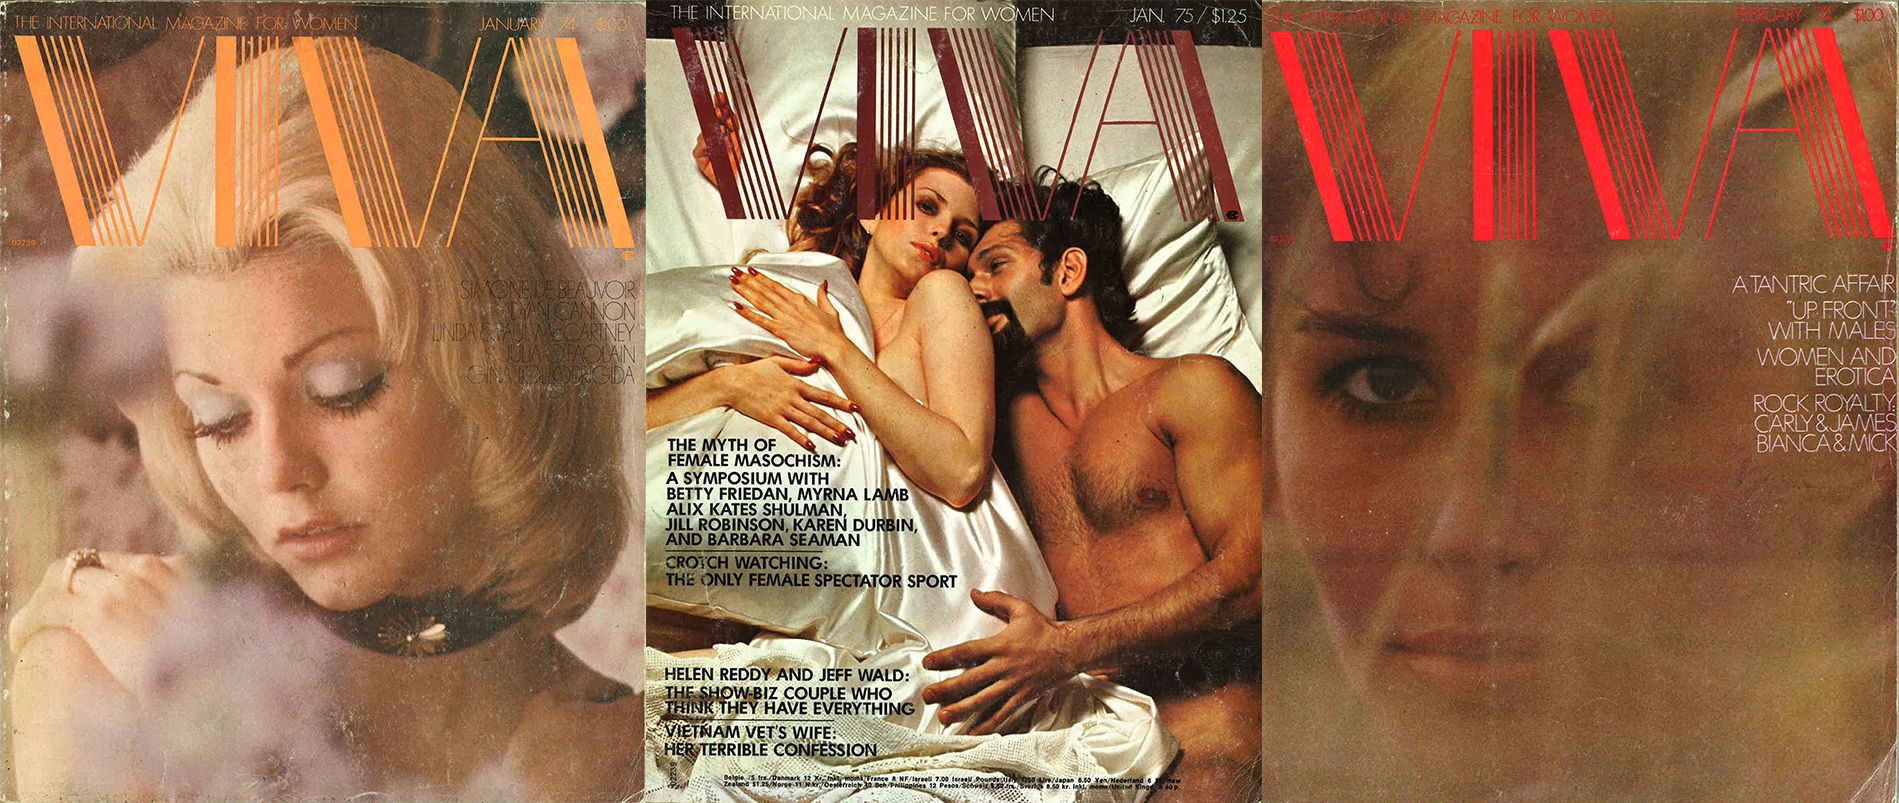 Shelley Long Porn Captions - An Oral History of Viva, the '70s Porn Magazine for Women